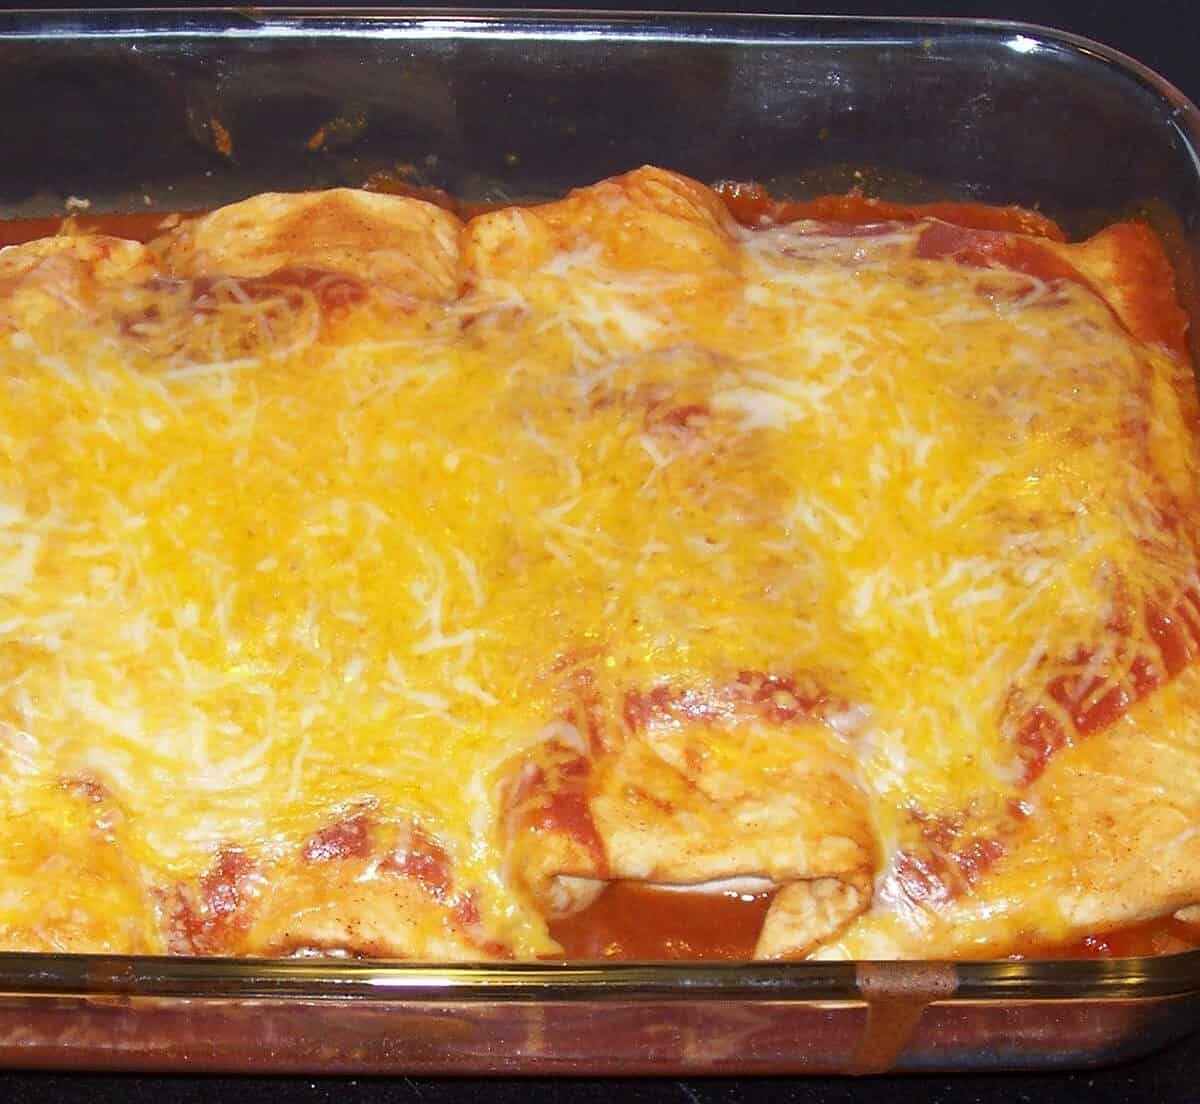  These enchiladas are packed with flavor and perfect for a crowd-pleasing meal